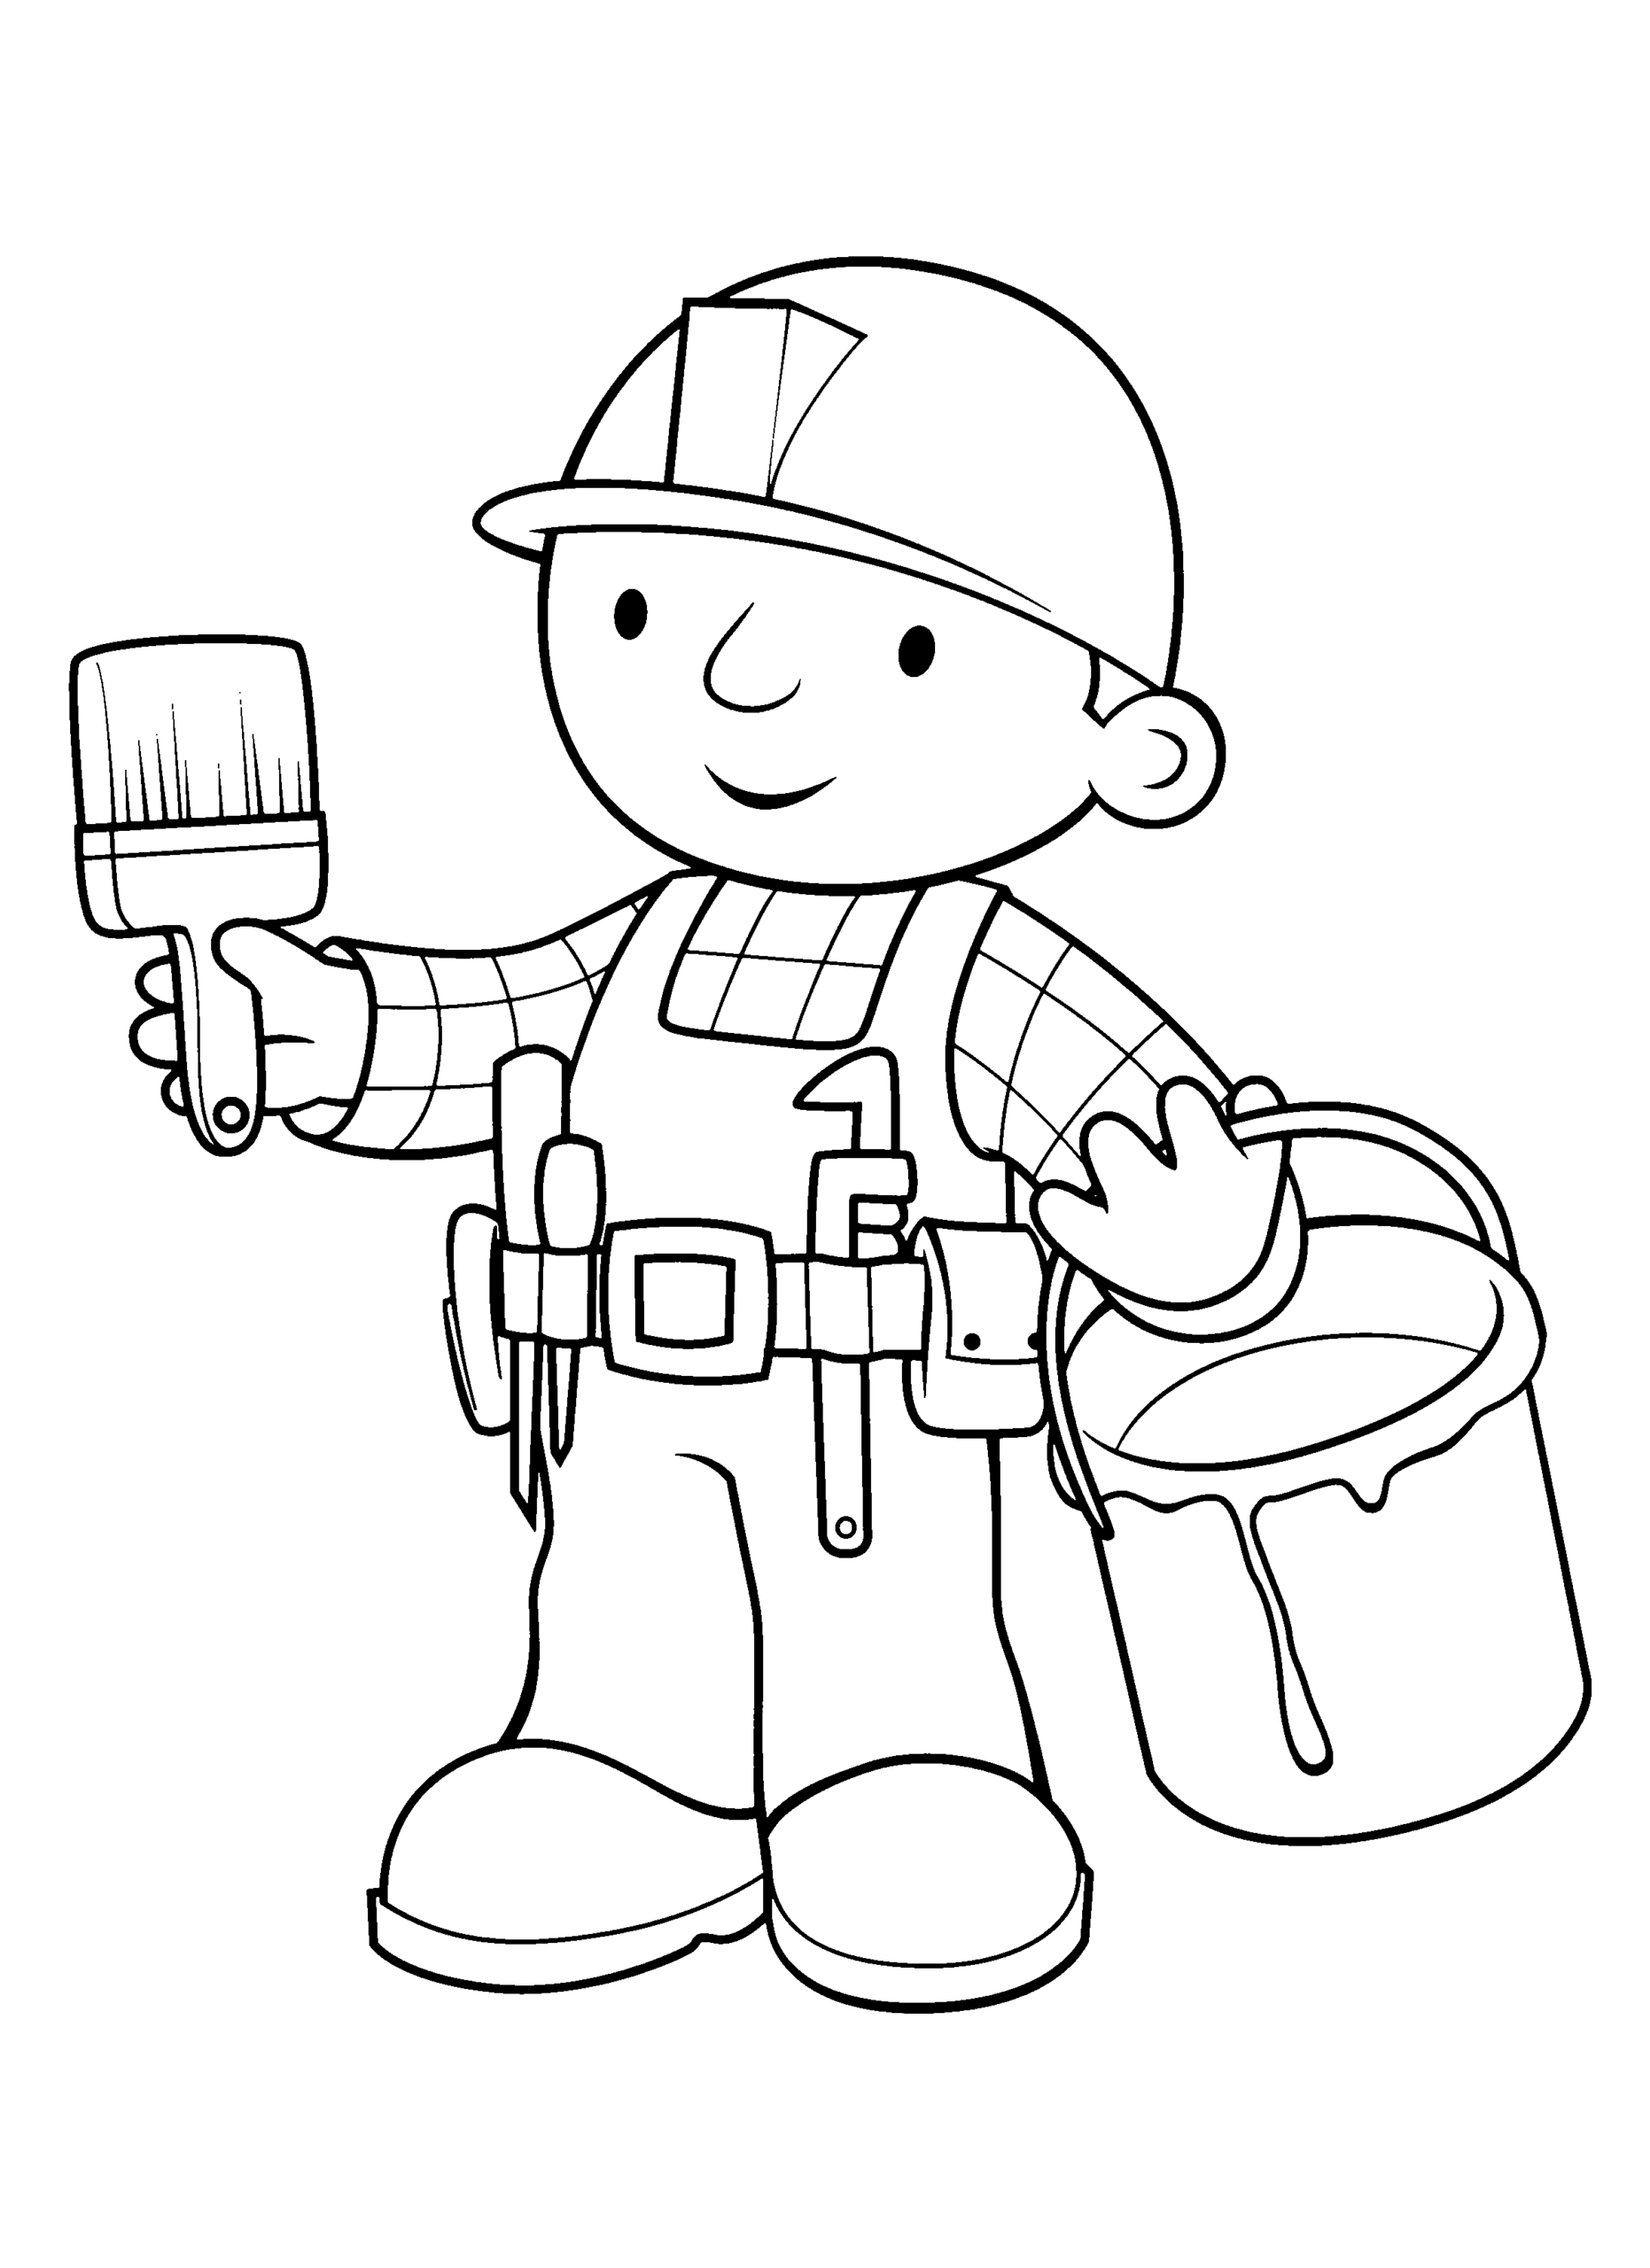 Bob the Builder Coloring Pages TV Film of Bob The Builder Printable 2020 01137 Coloring4free